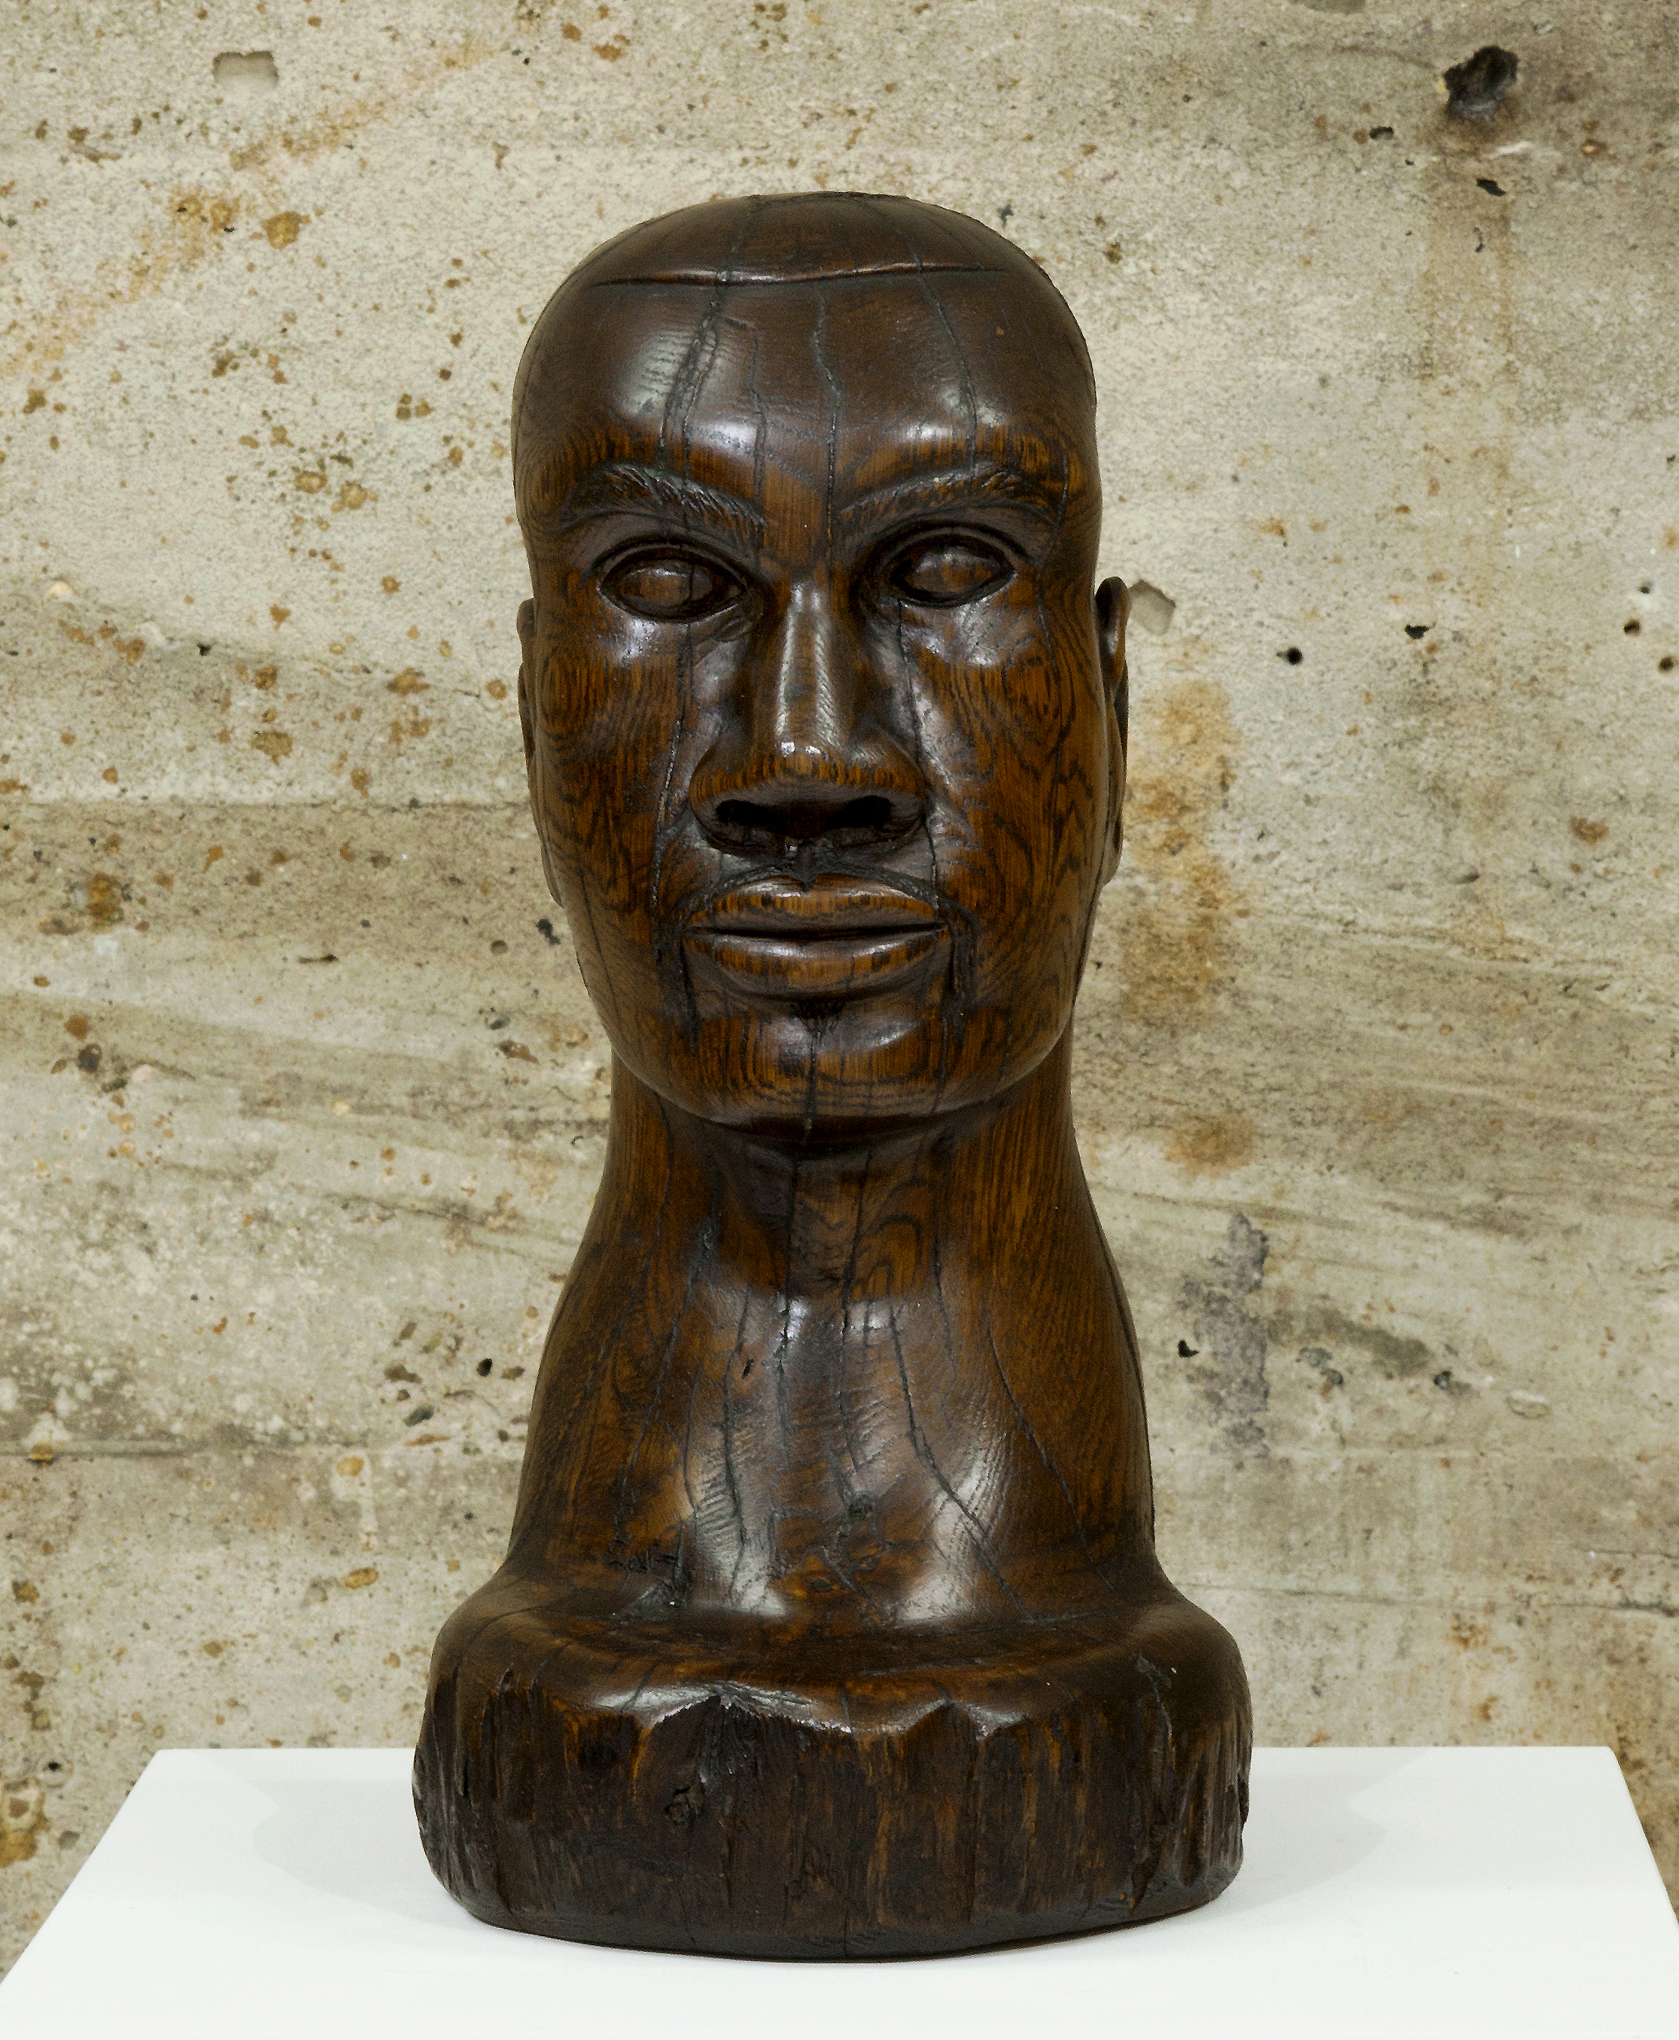 Fine Sculpture by African-American Artists